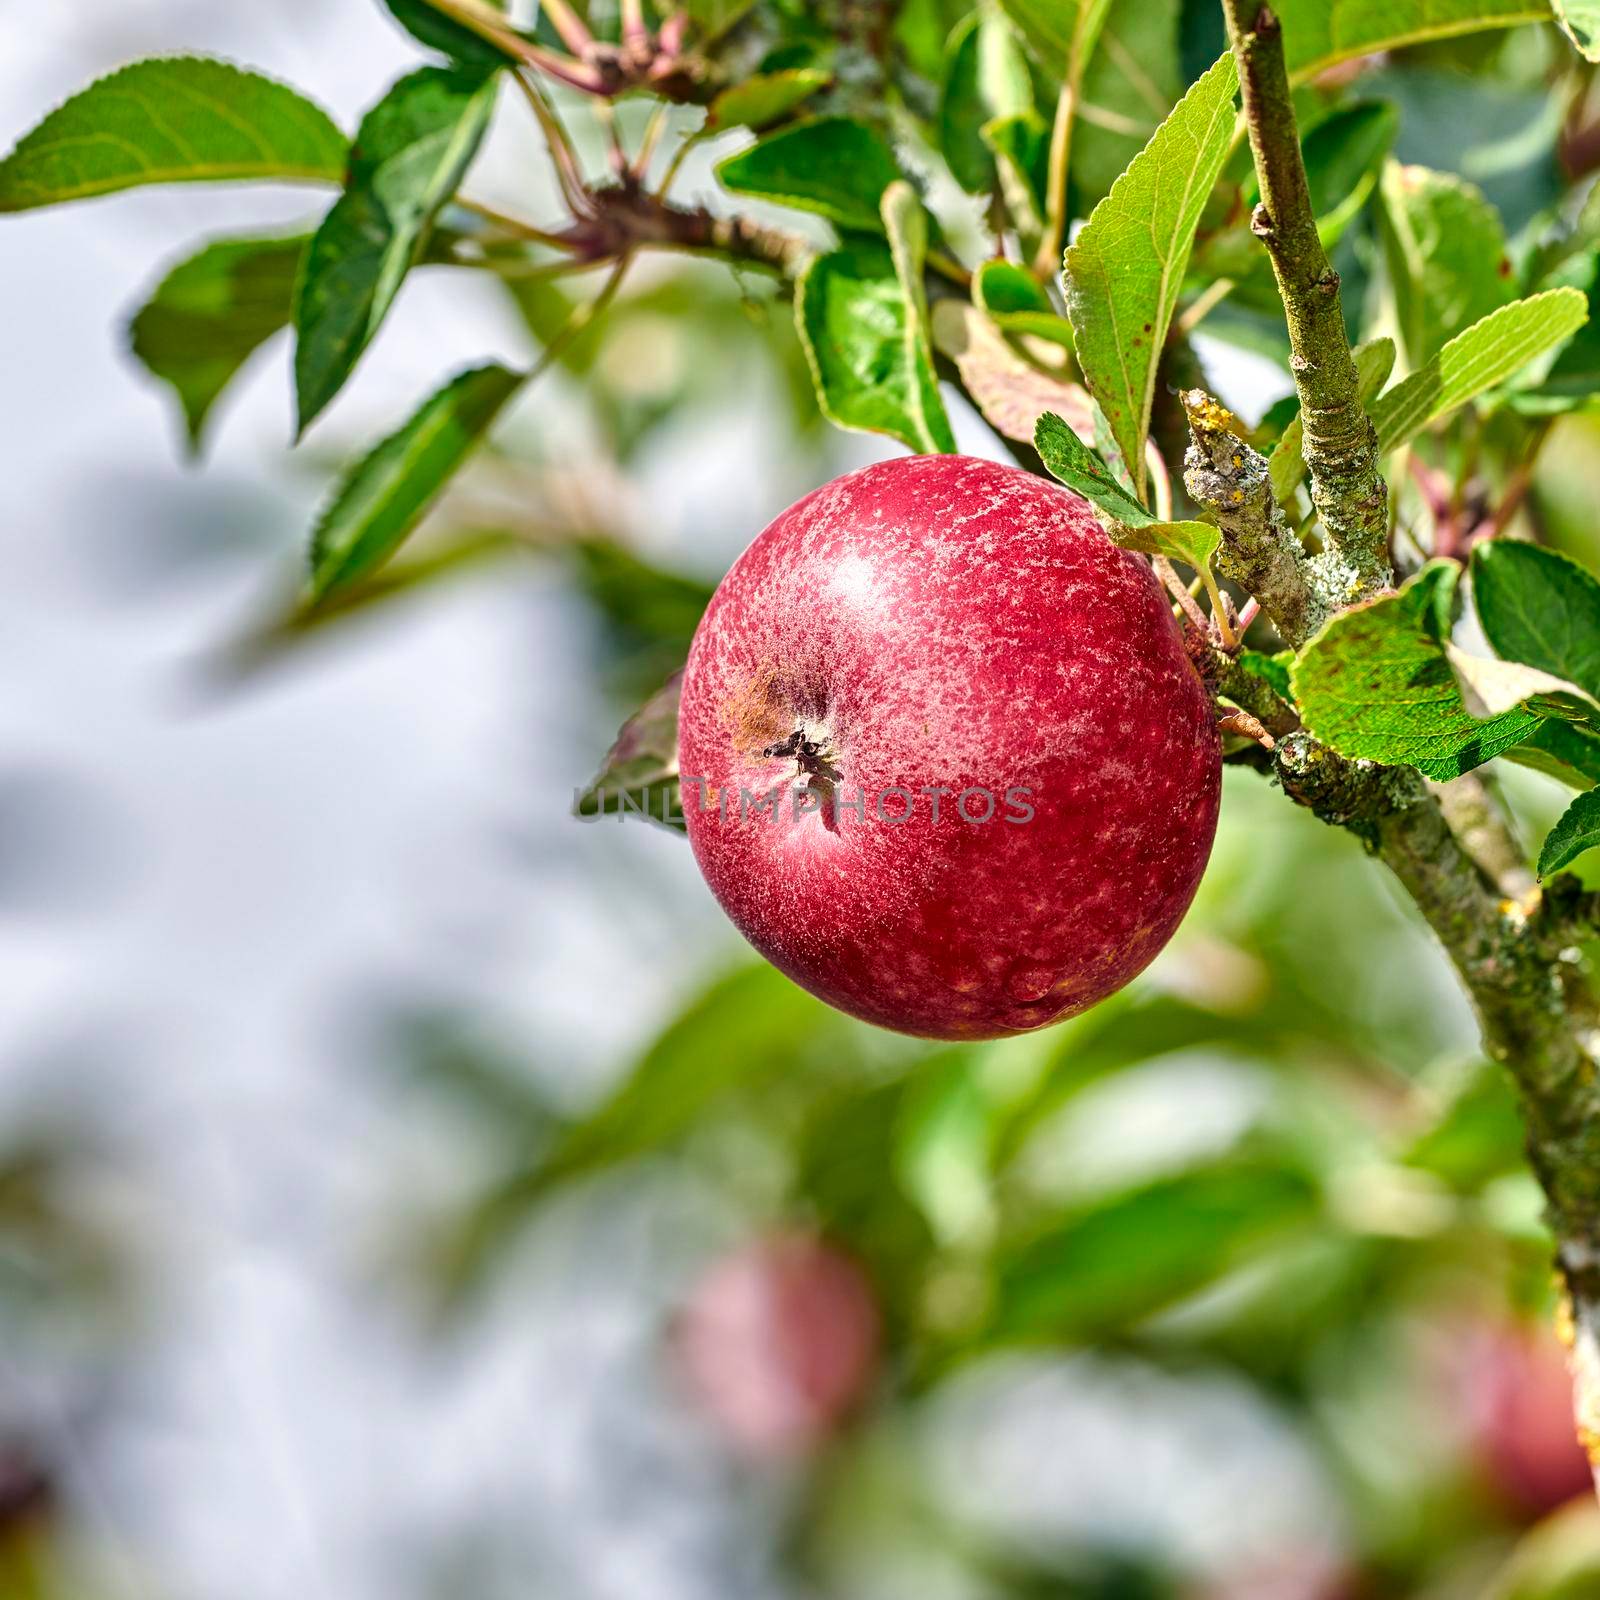 Apple-picking has never looked so enticing - a really healthy and tempting treat